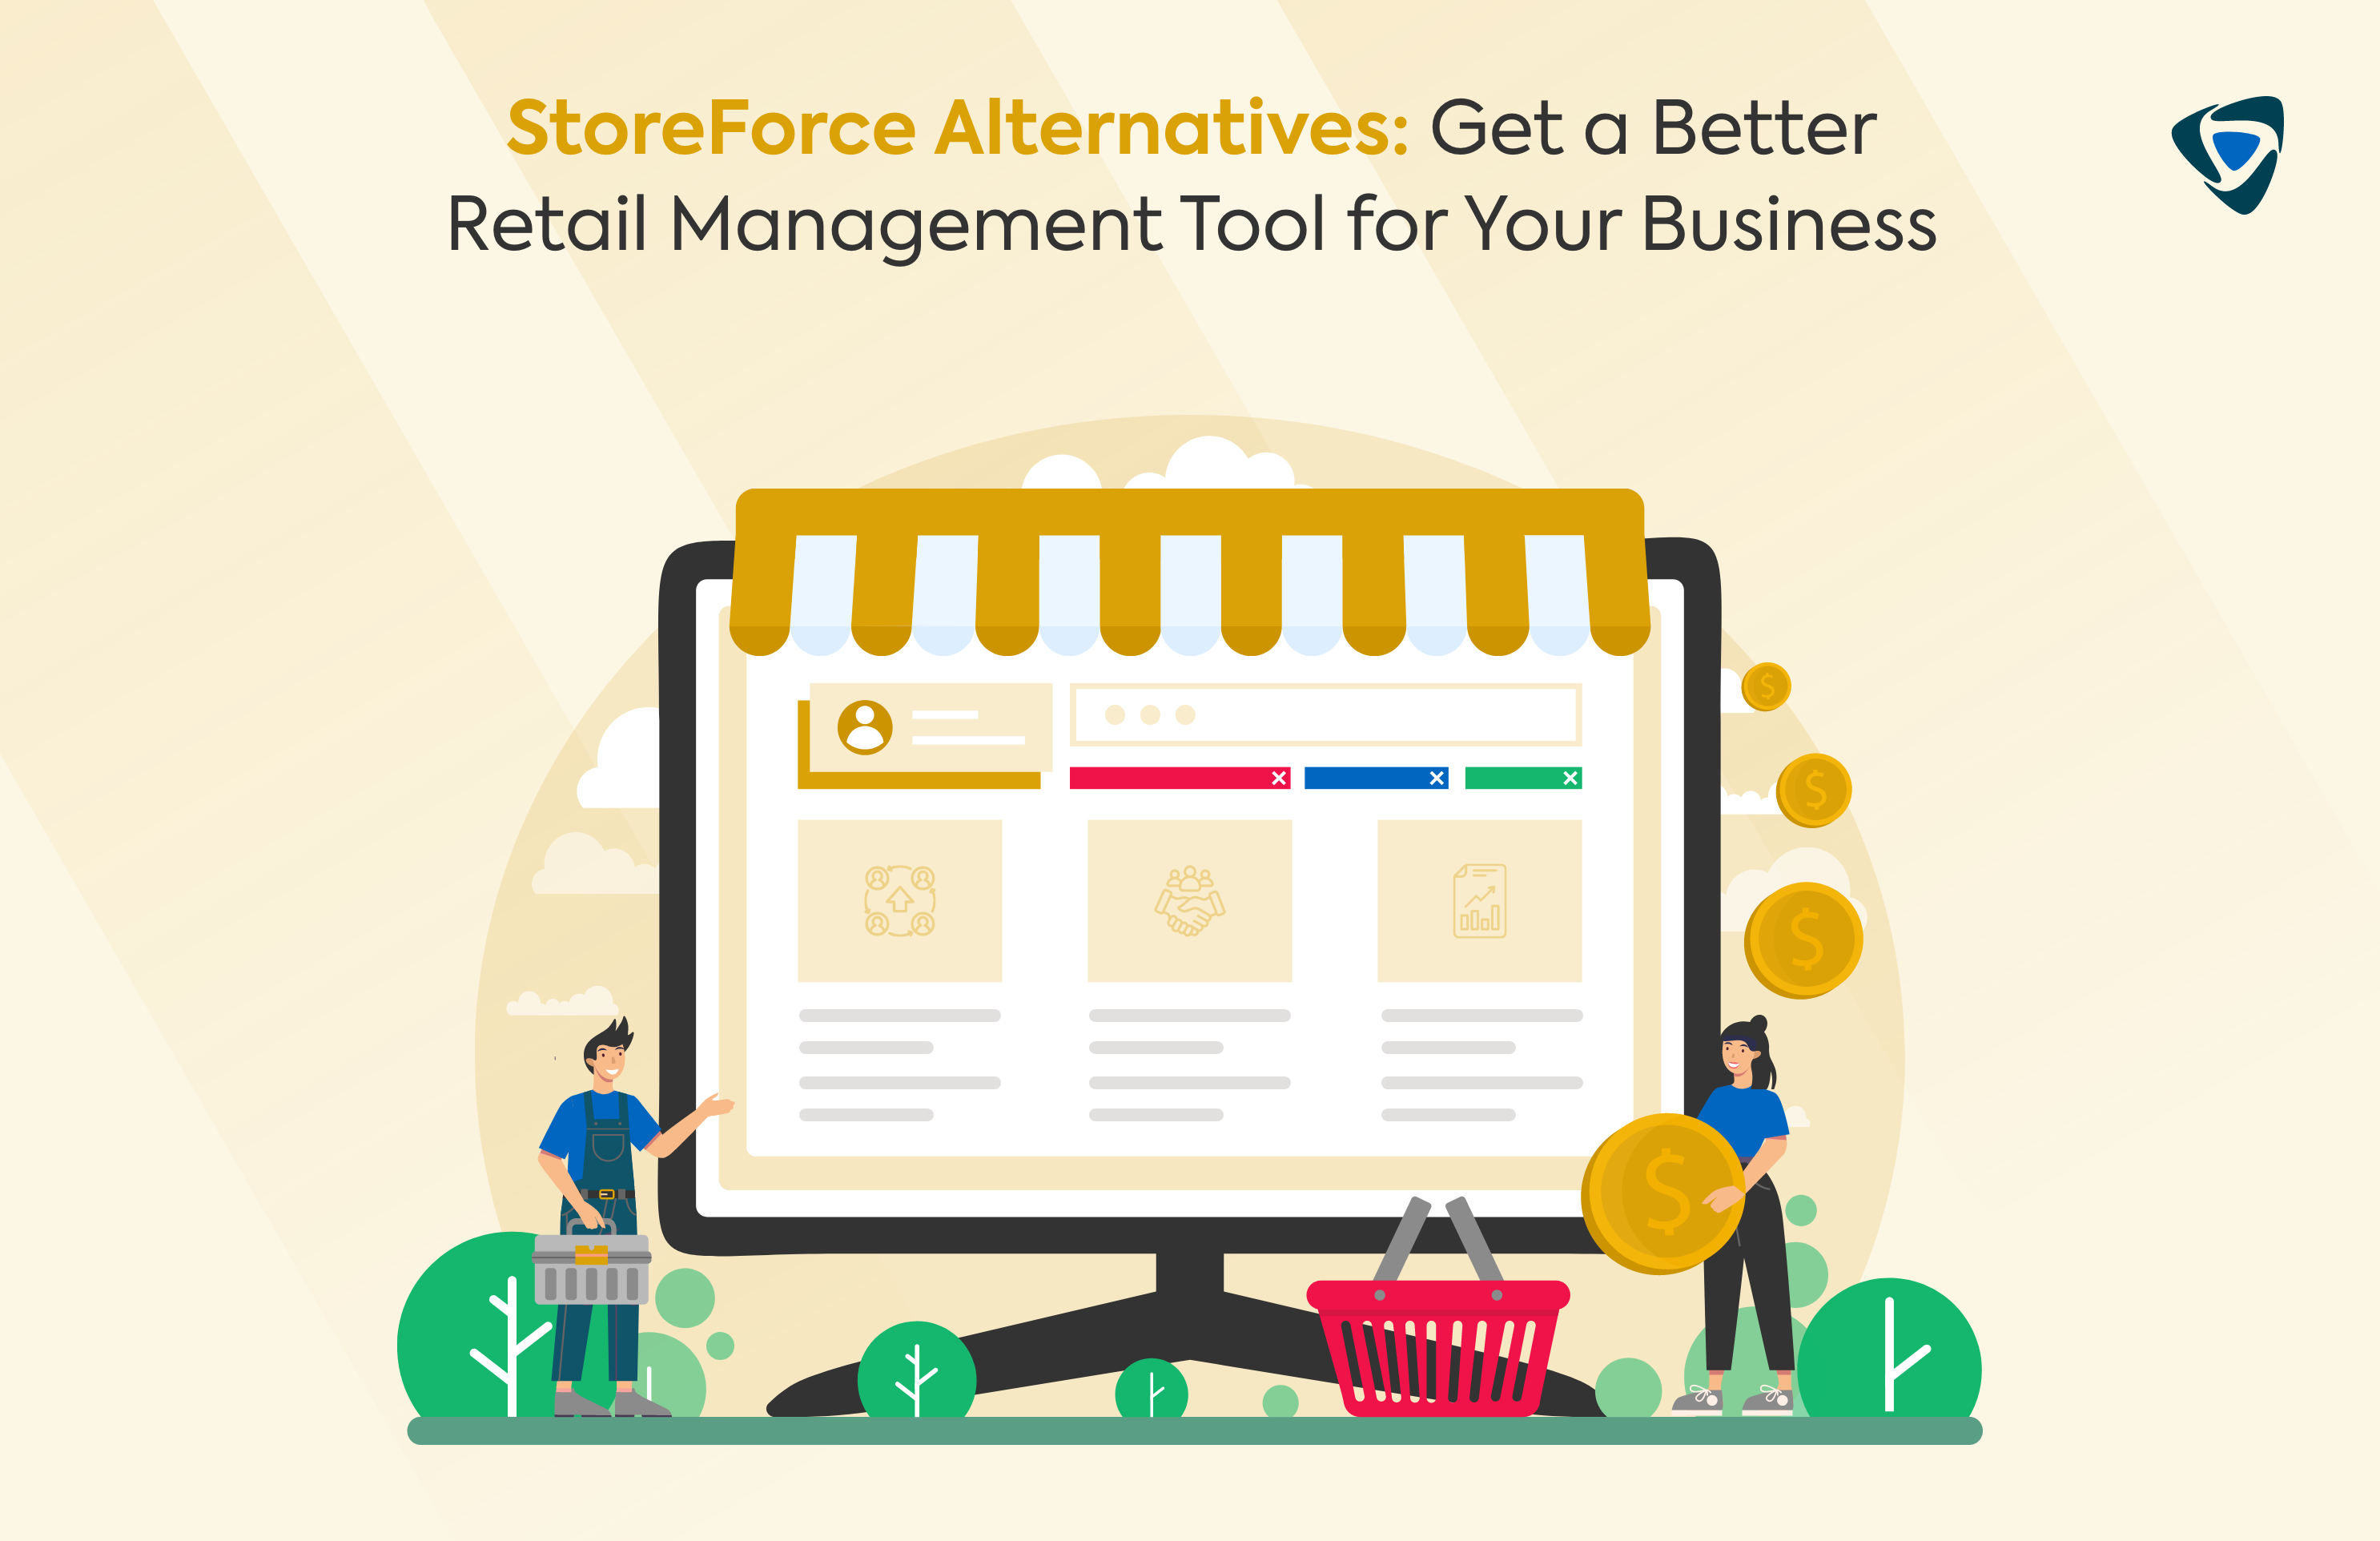 StoreForce Alternatives: Get a Better Retail Management Tool for Your Business